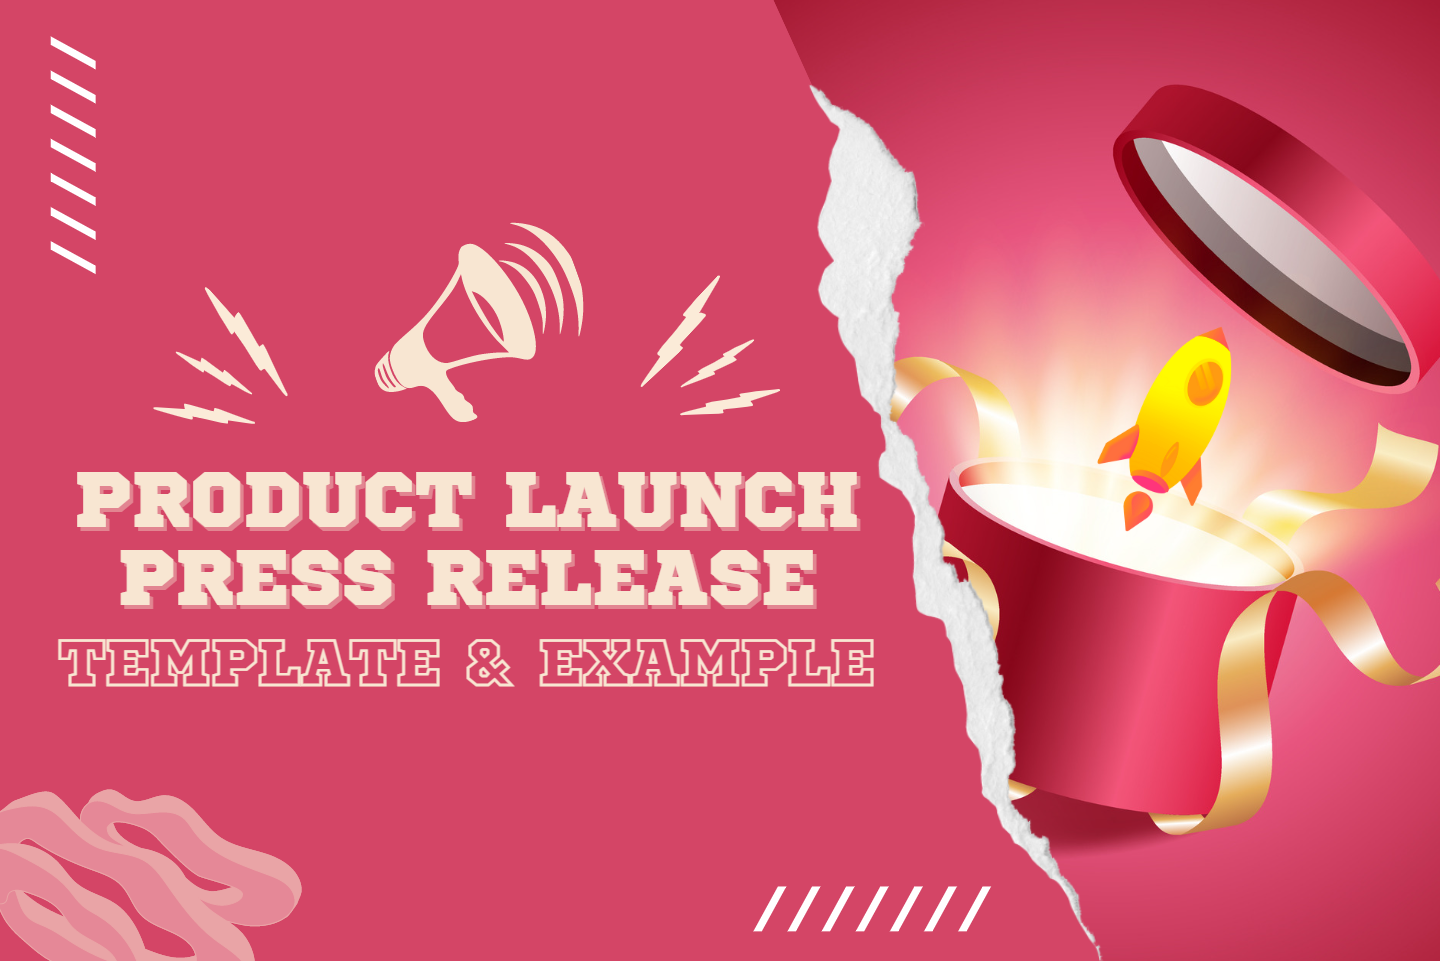 Product Launch Press Release Template & Example